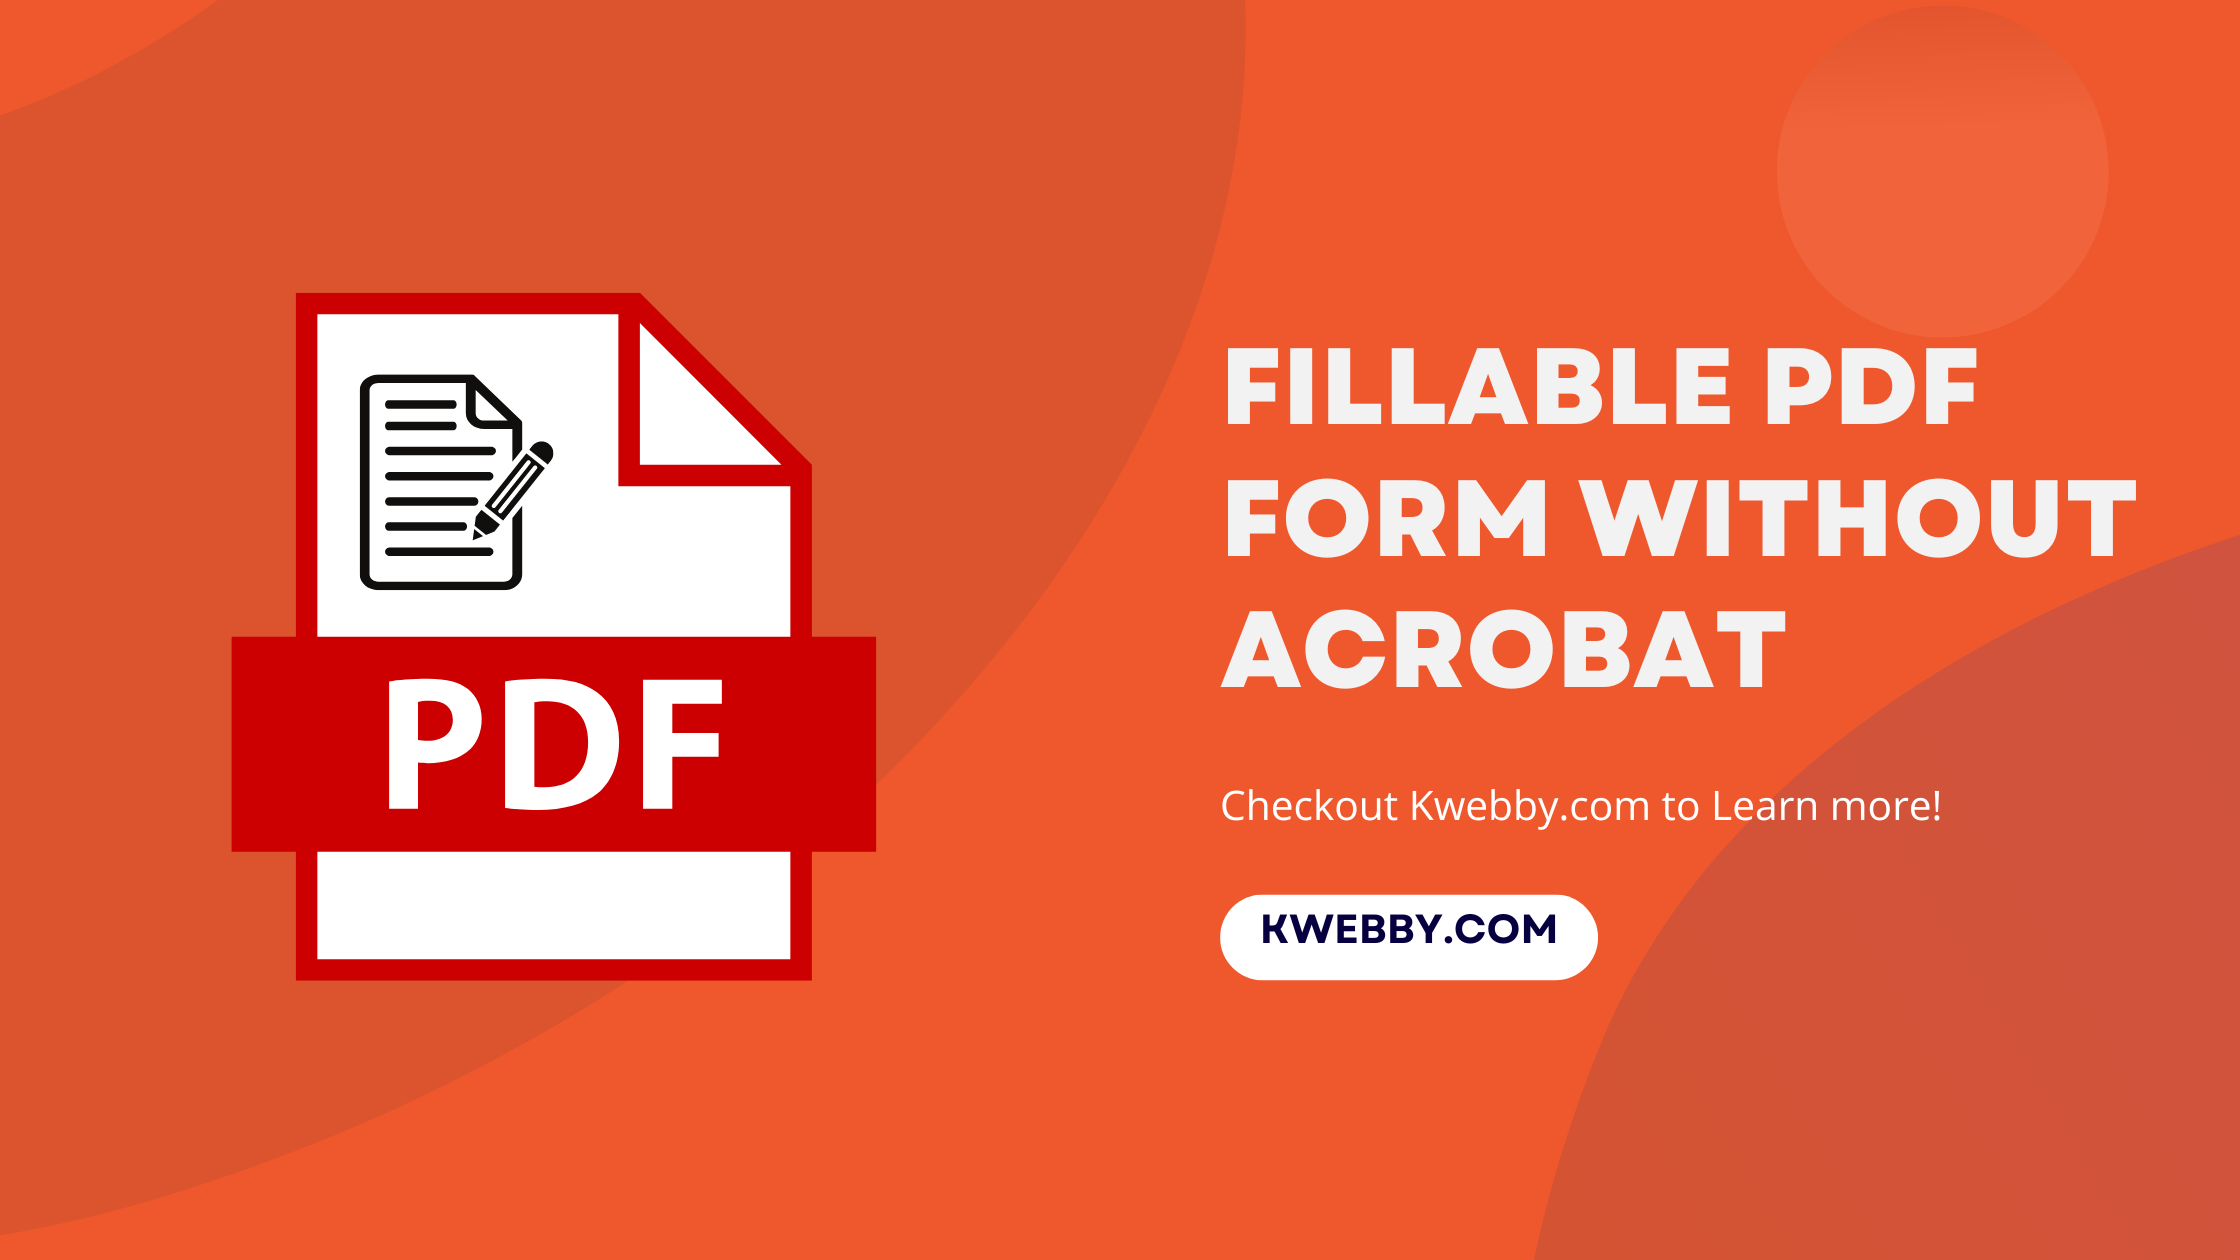 How to make a fillable PDF form without Acrobat